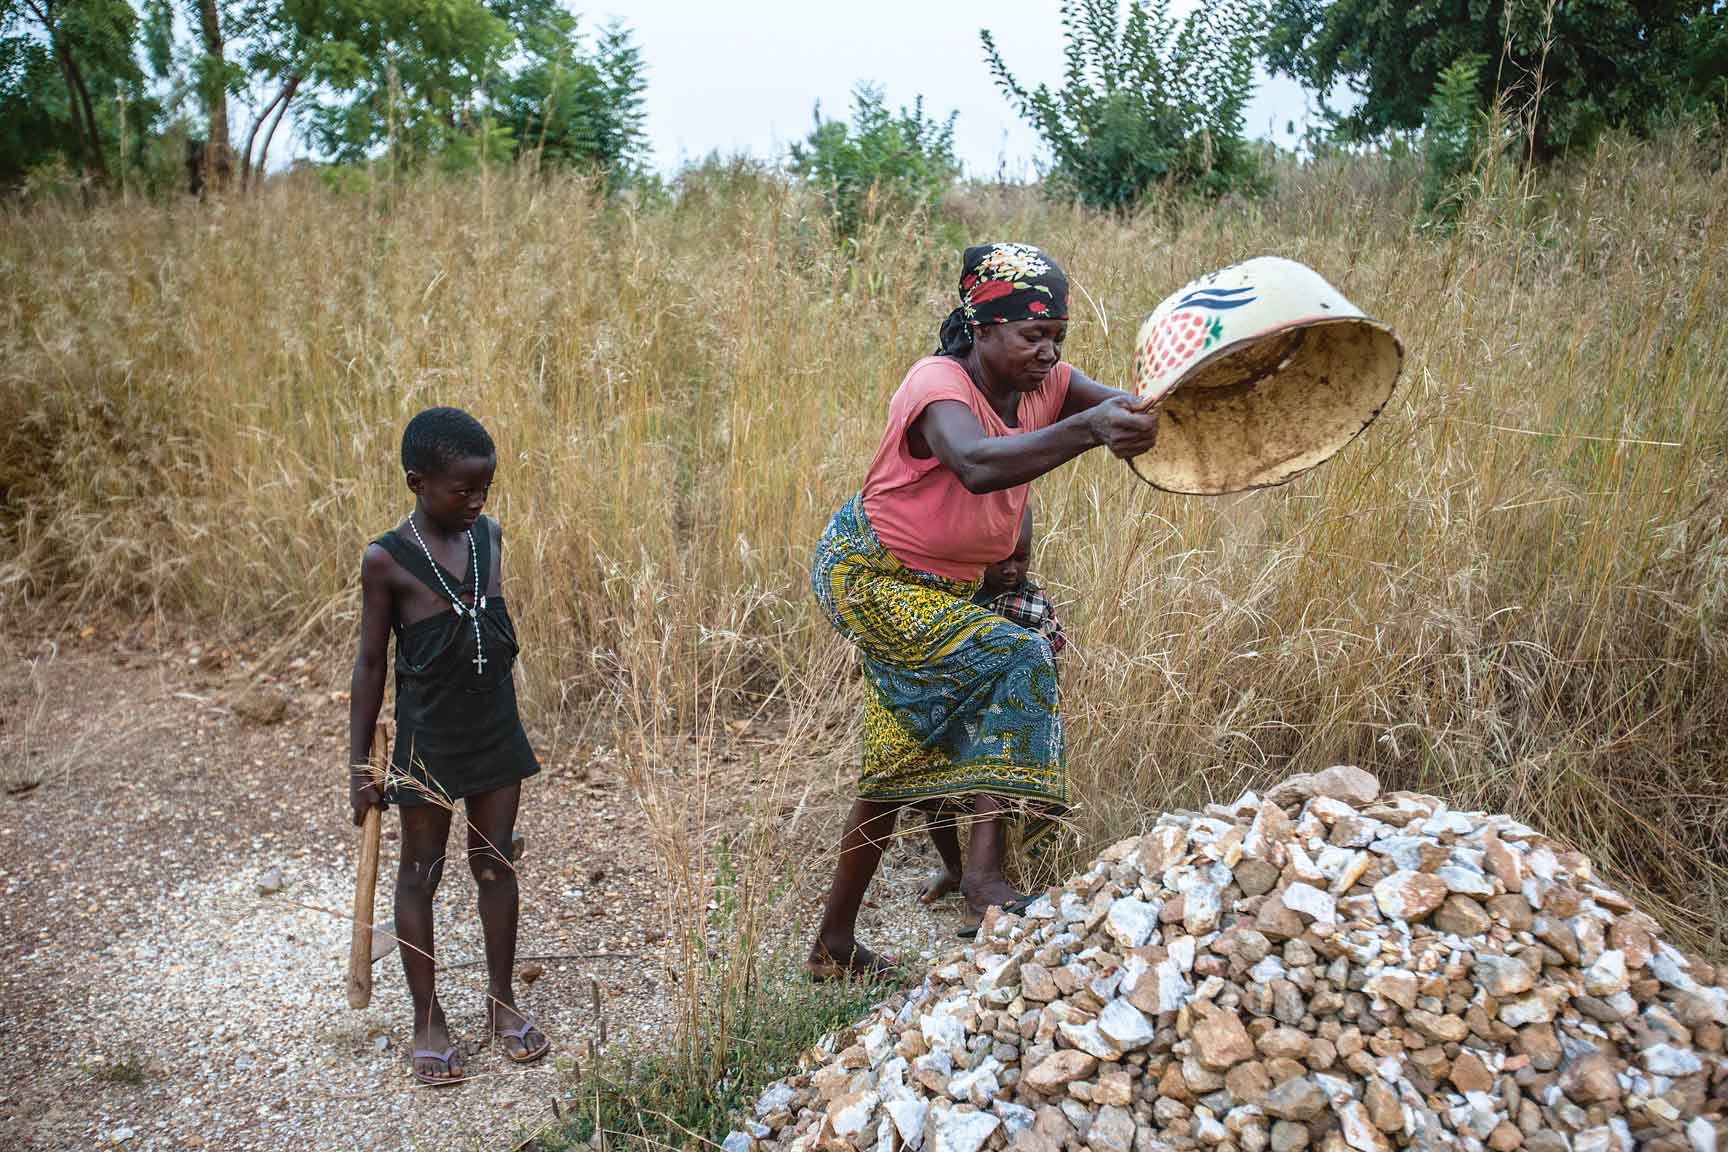 “I collect stones every day … My arms and shoulders hurt at night.” — Beatrice, Ghana